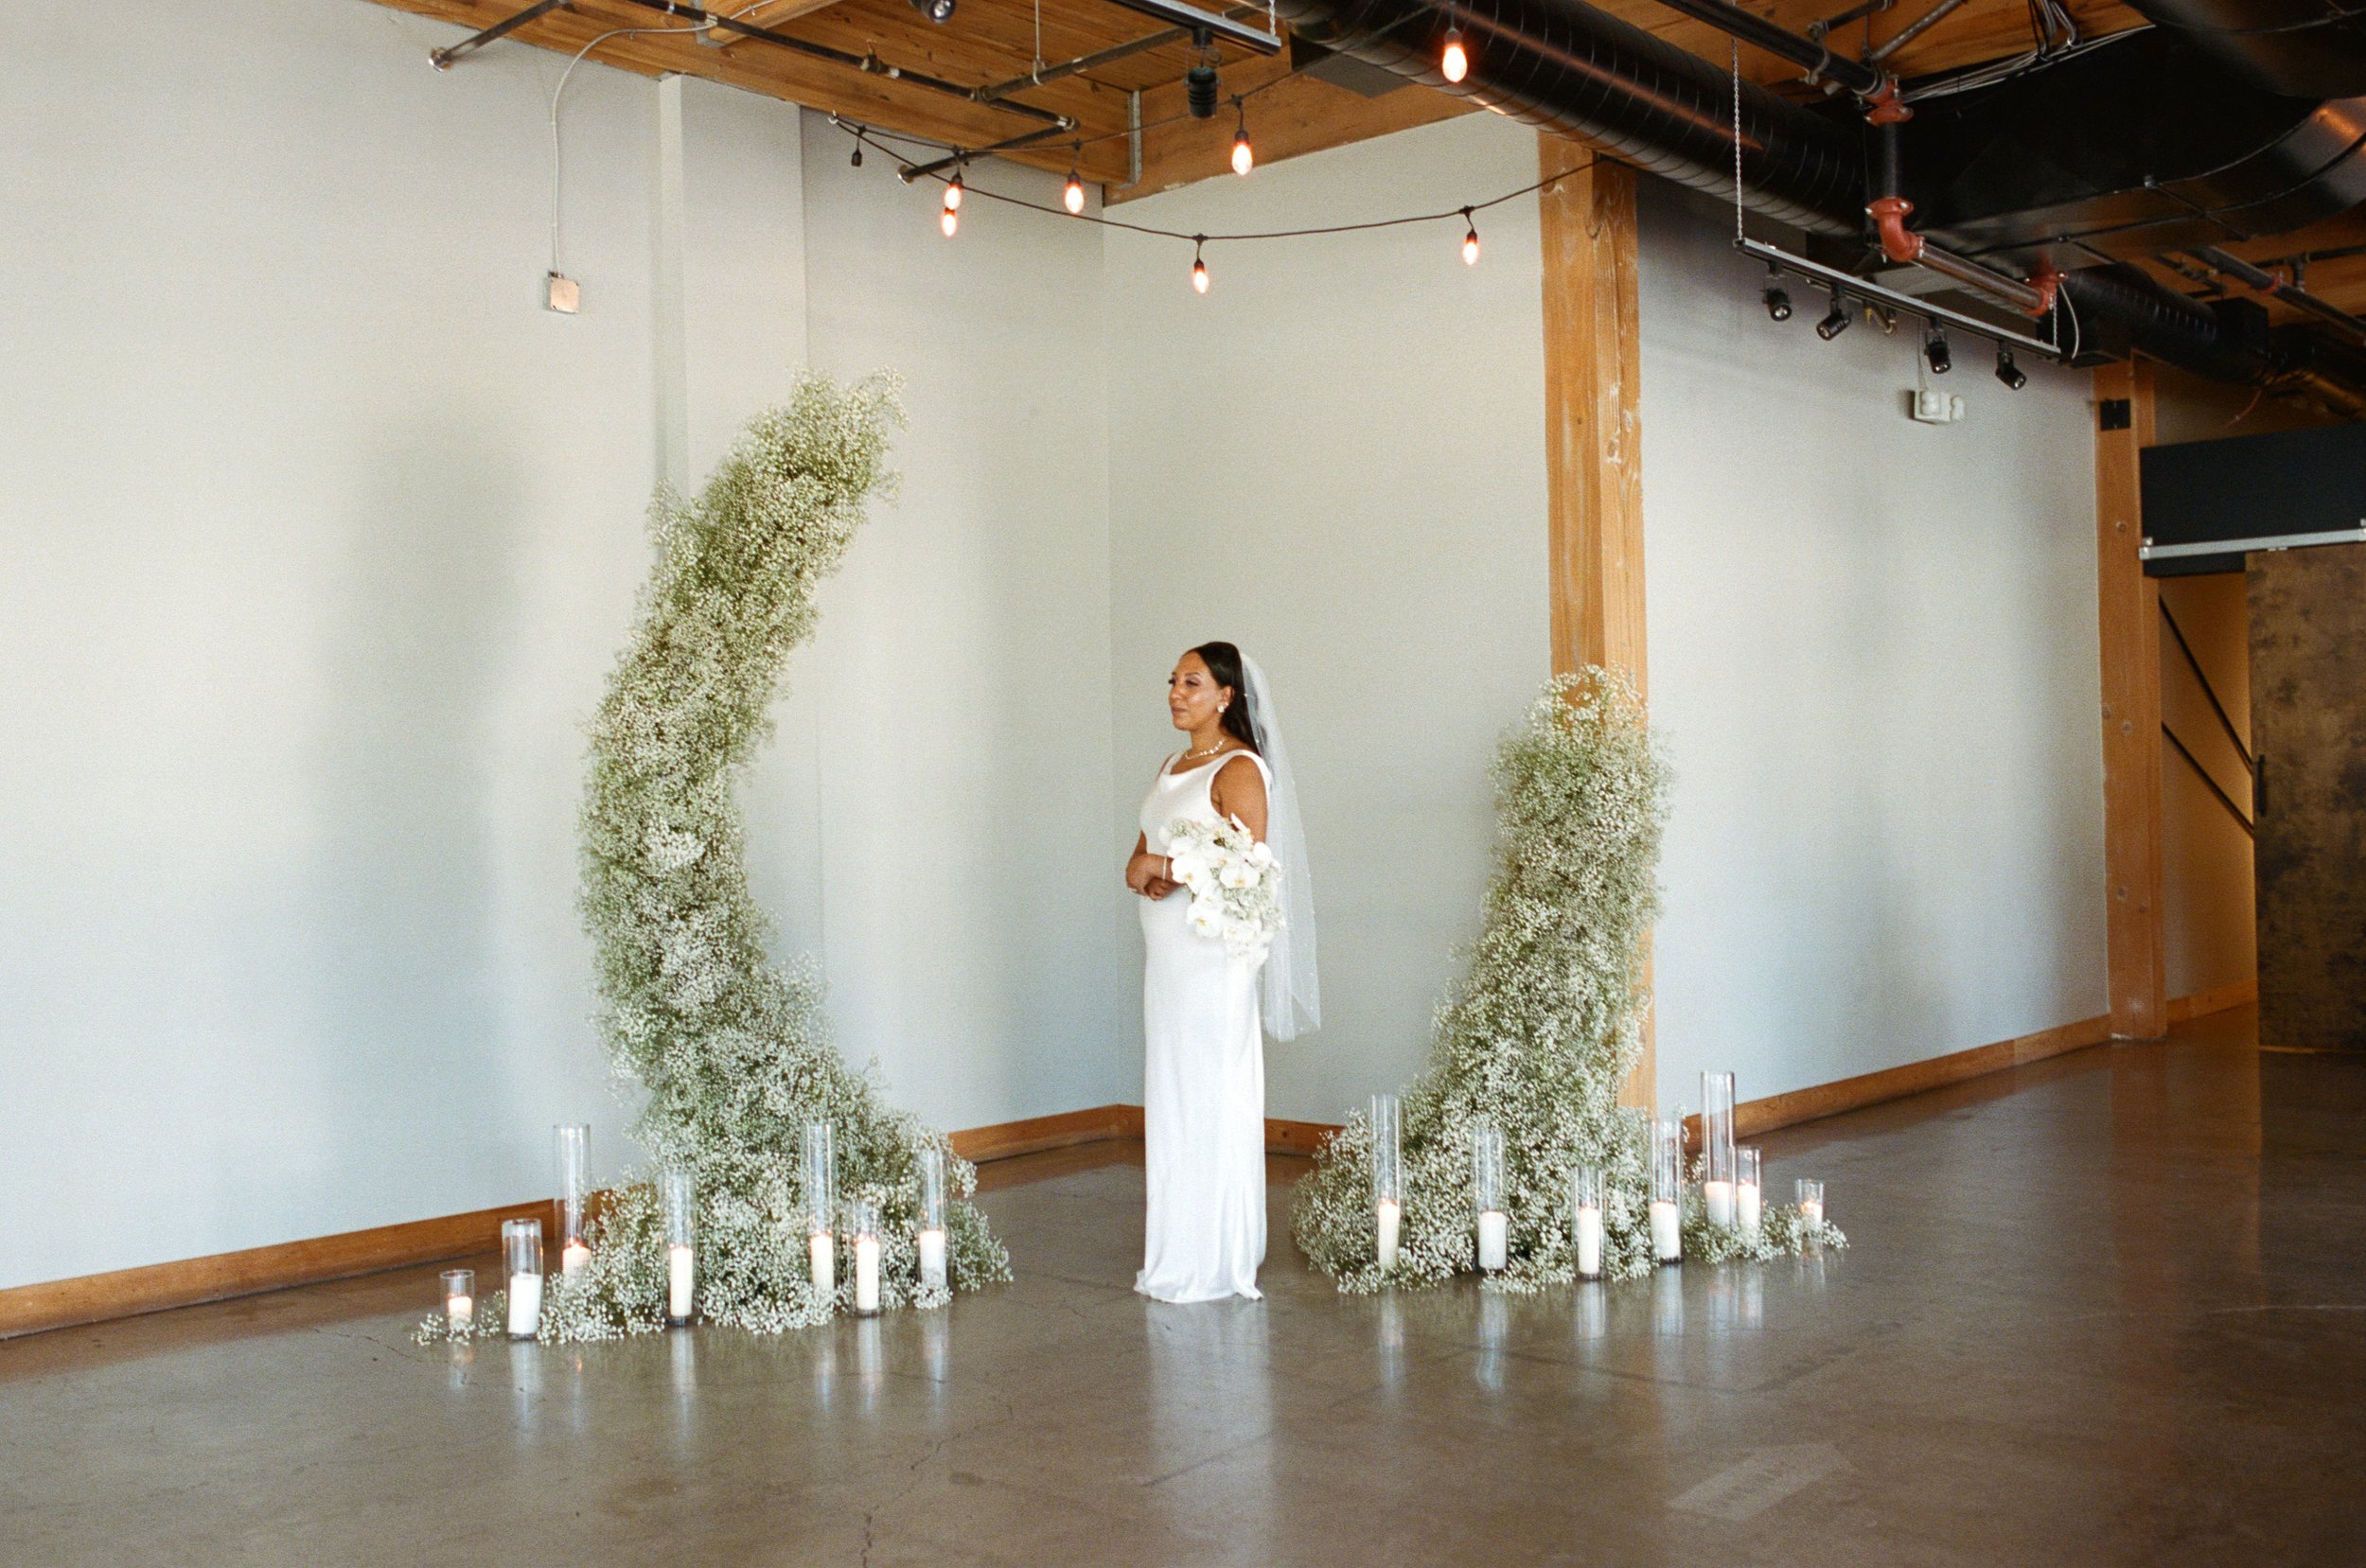 woman holding flower bouquet standing in between flower arch for wedding photos. Oregon wedding film photographers